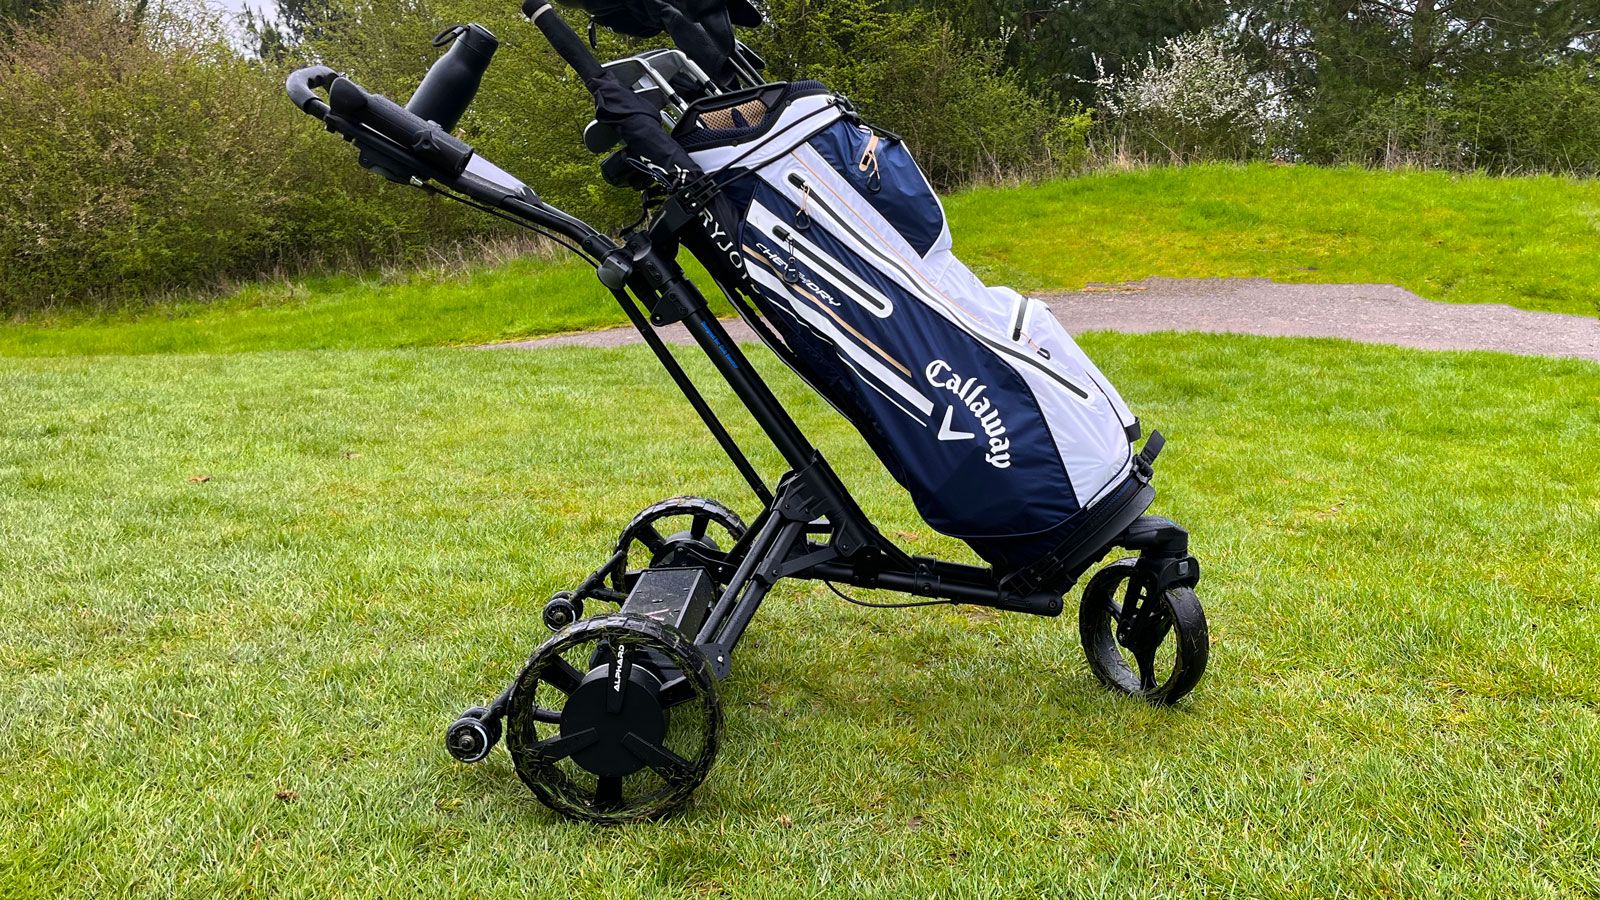 Alphard Club Booster V2 Review | Golf Monthly